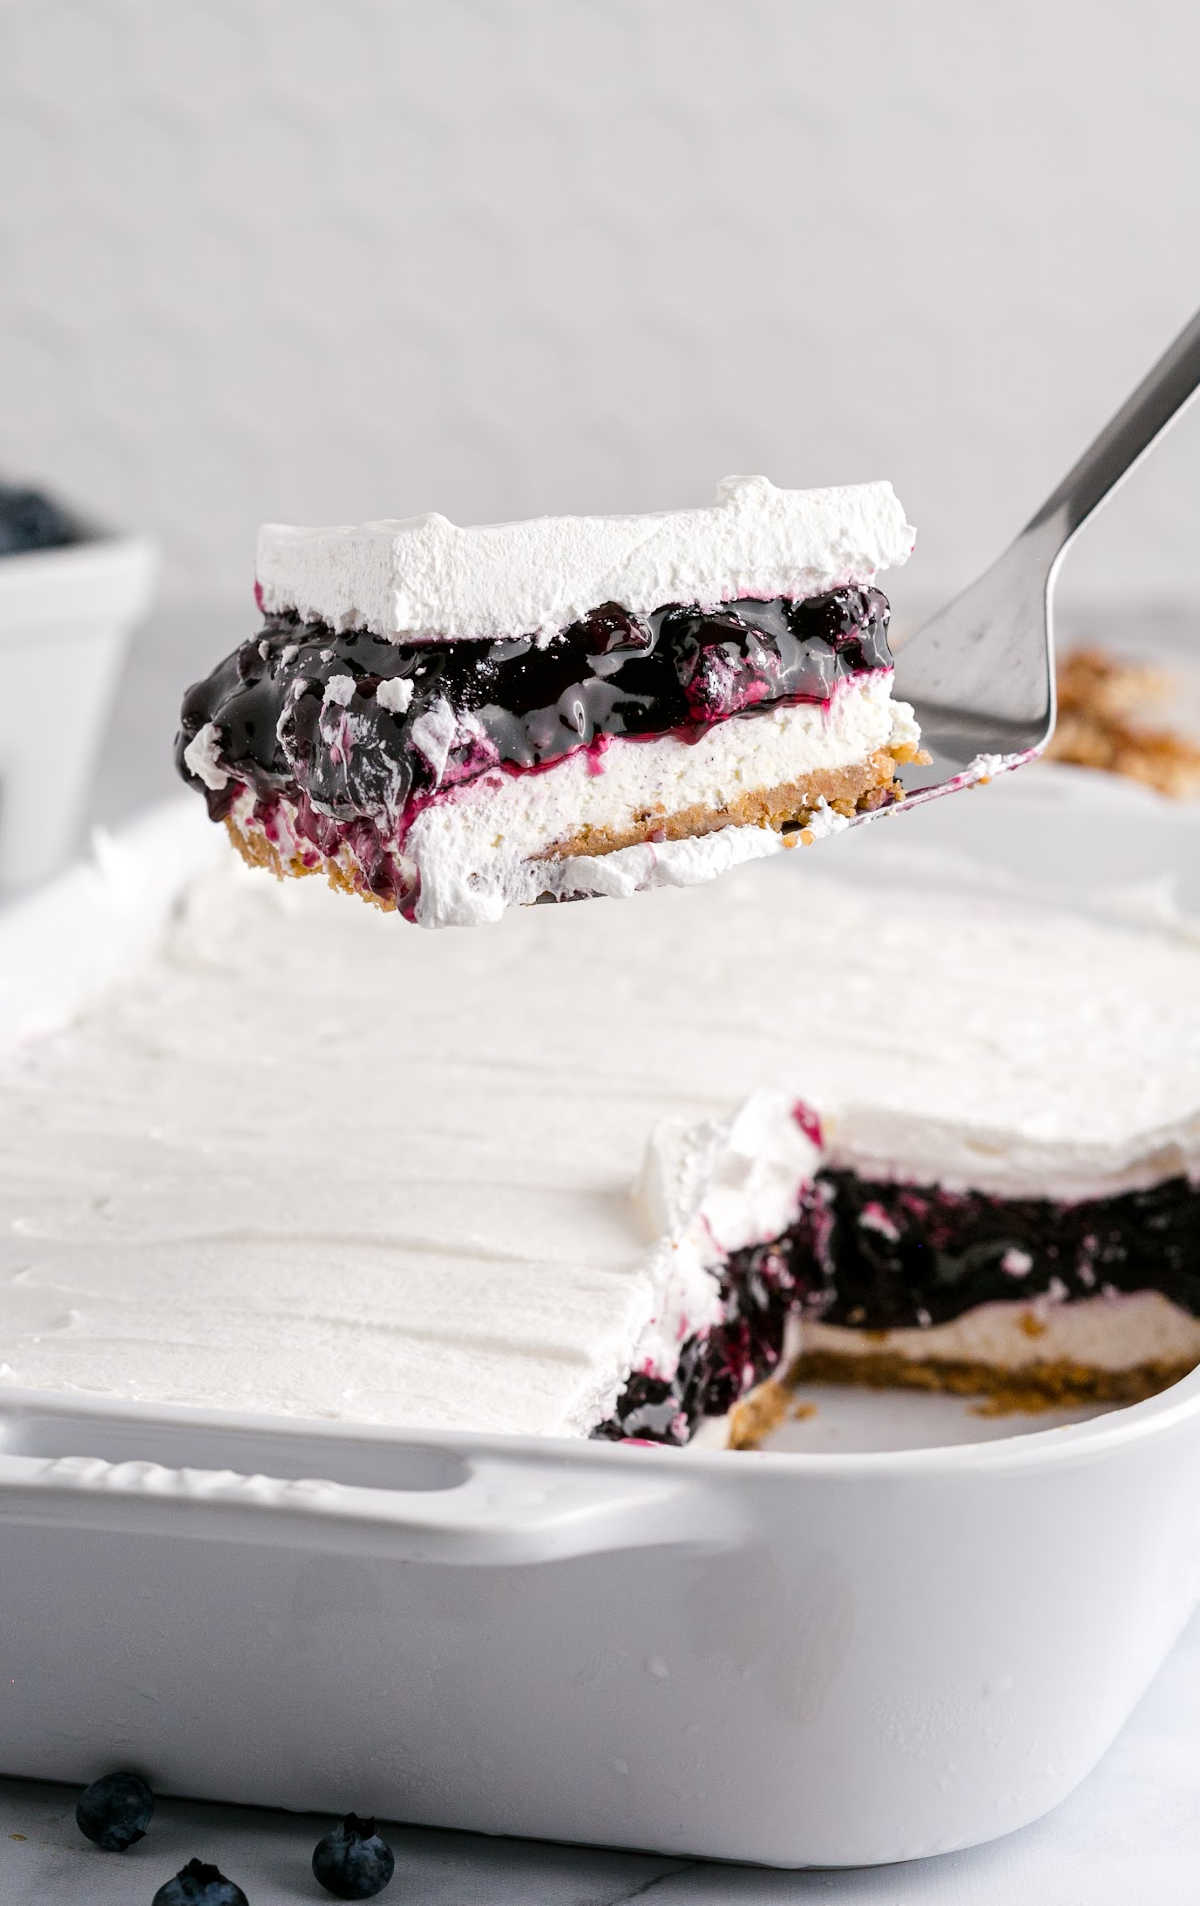 Blueberry Delight on a baking dish and slice of Blueberry Delight on a fork